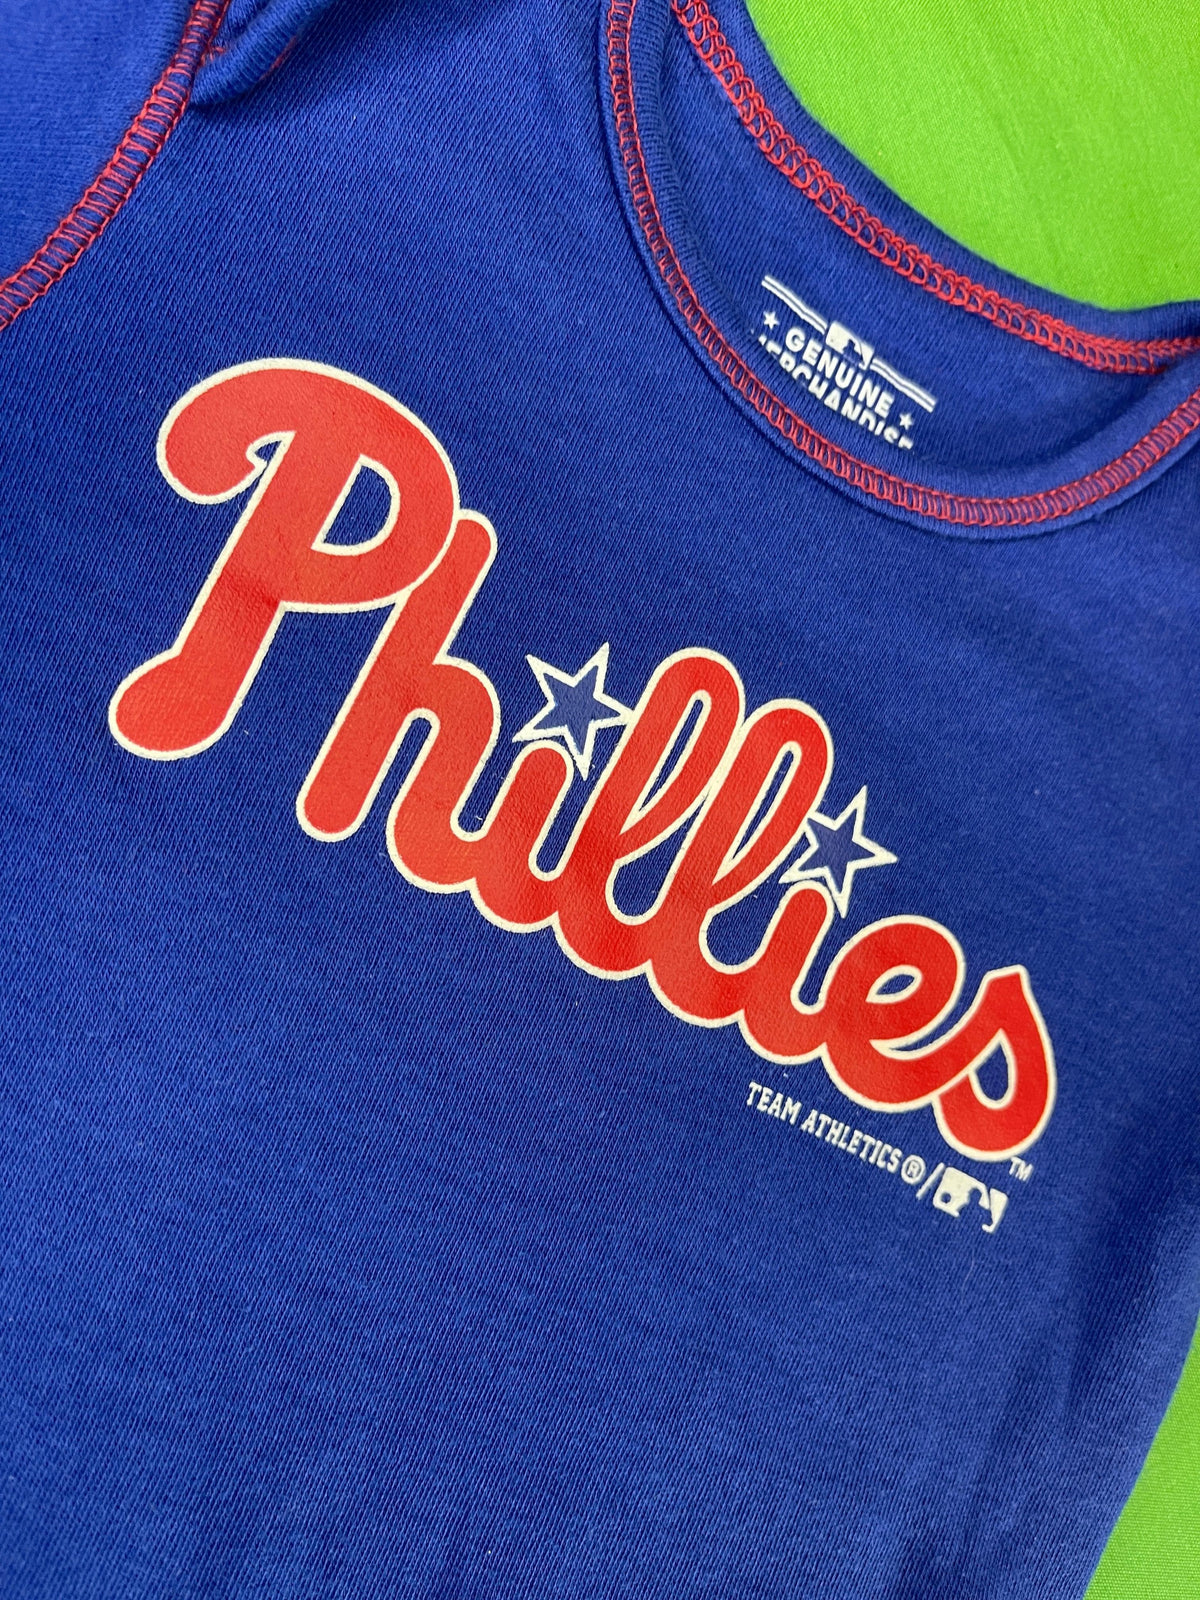 MLB Philadelphia Phillies Chase Utley #26 Majestic World Series Jersey  Youth Small 6-8